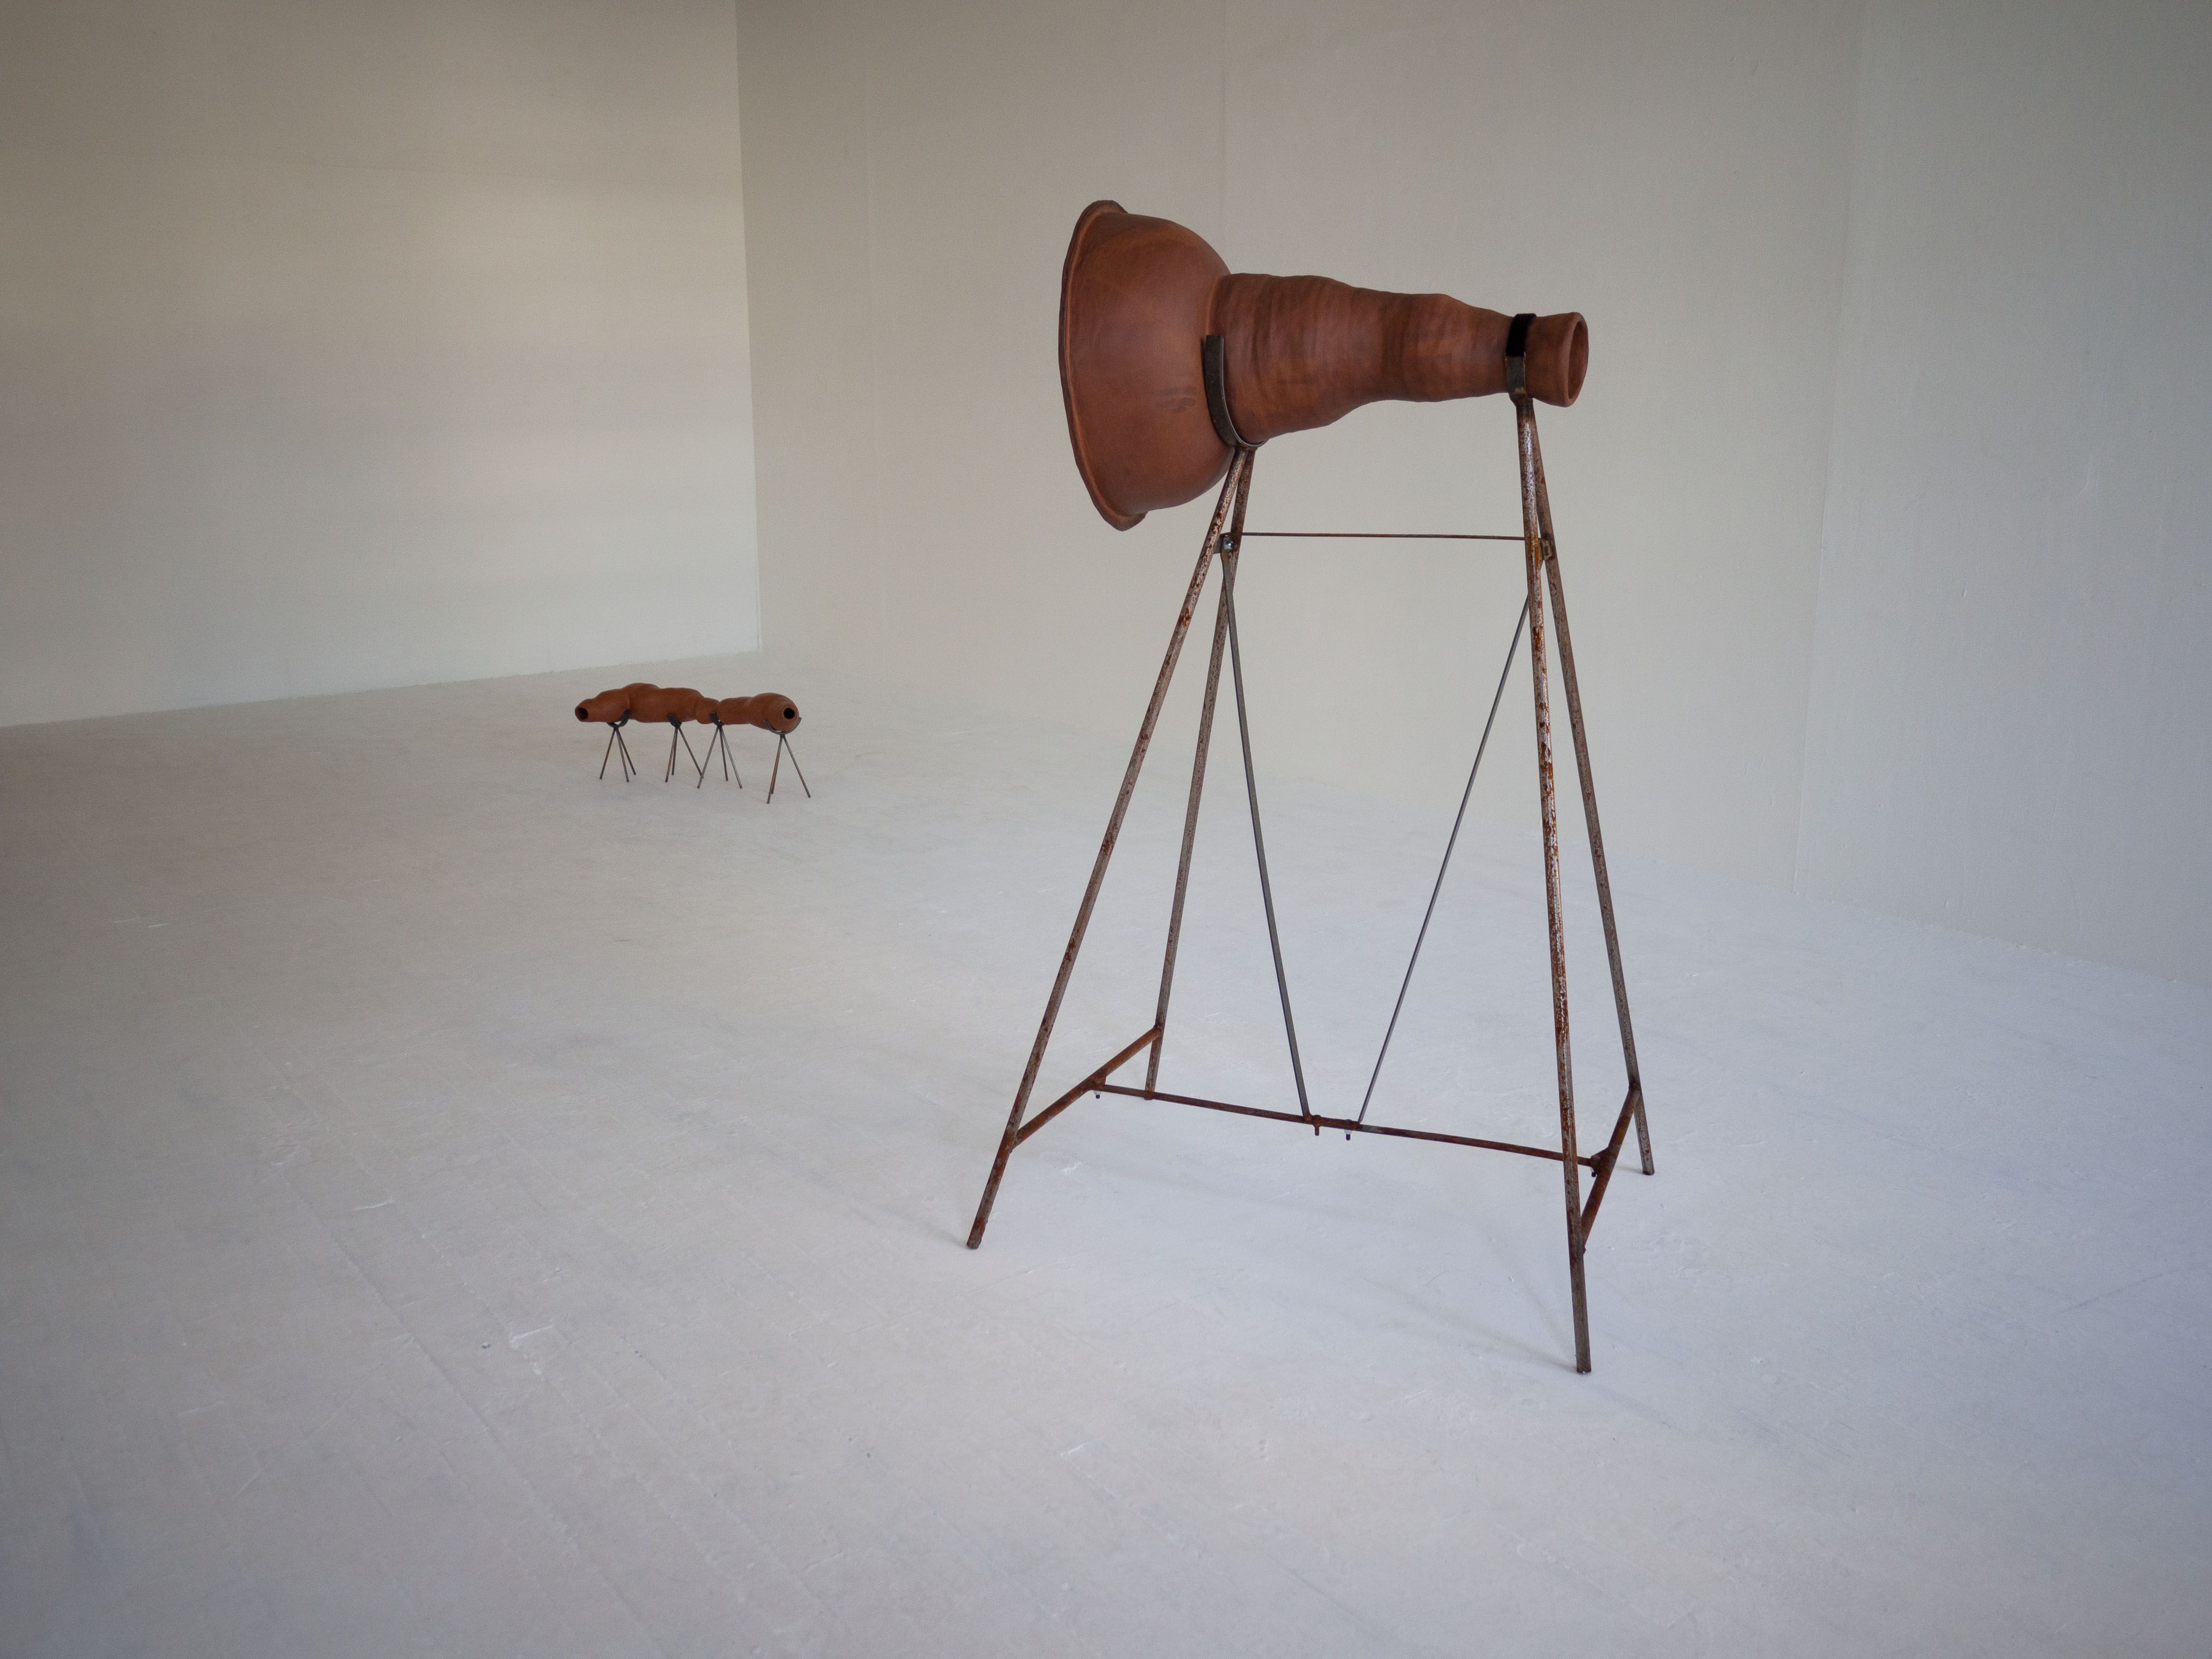 Installation piece, two clay abstract objects are on display in a white walled studio space, both are held up by metal frames.